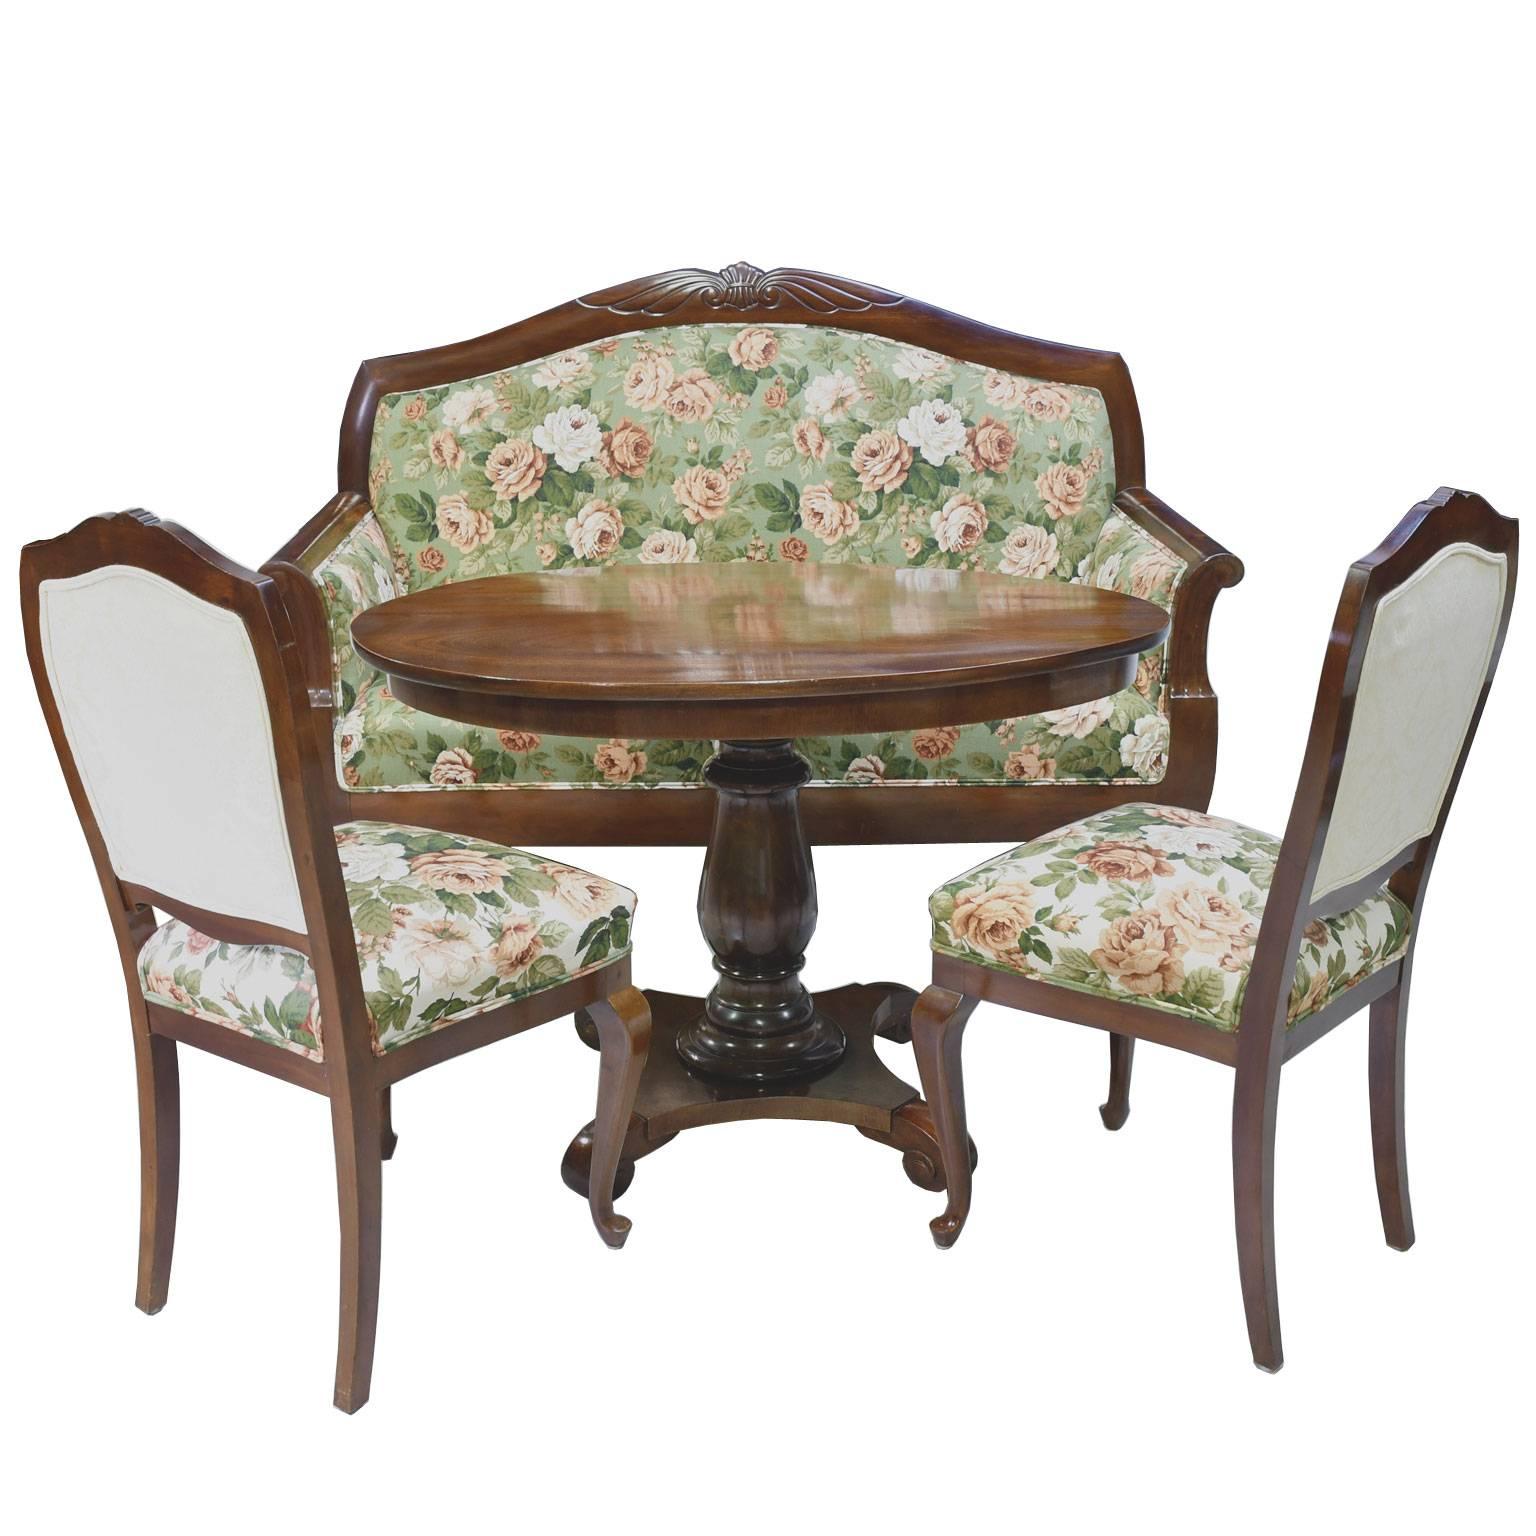 A very beautiful pre-World War I parlor suite in fine West Indies mahogany, comprising of a sofa, two chairs and oval table. Sofa and chairs have an arched back with carving of a shell flanked by wings on the crest rail, with upholstered seat and